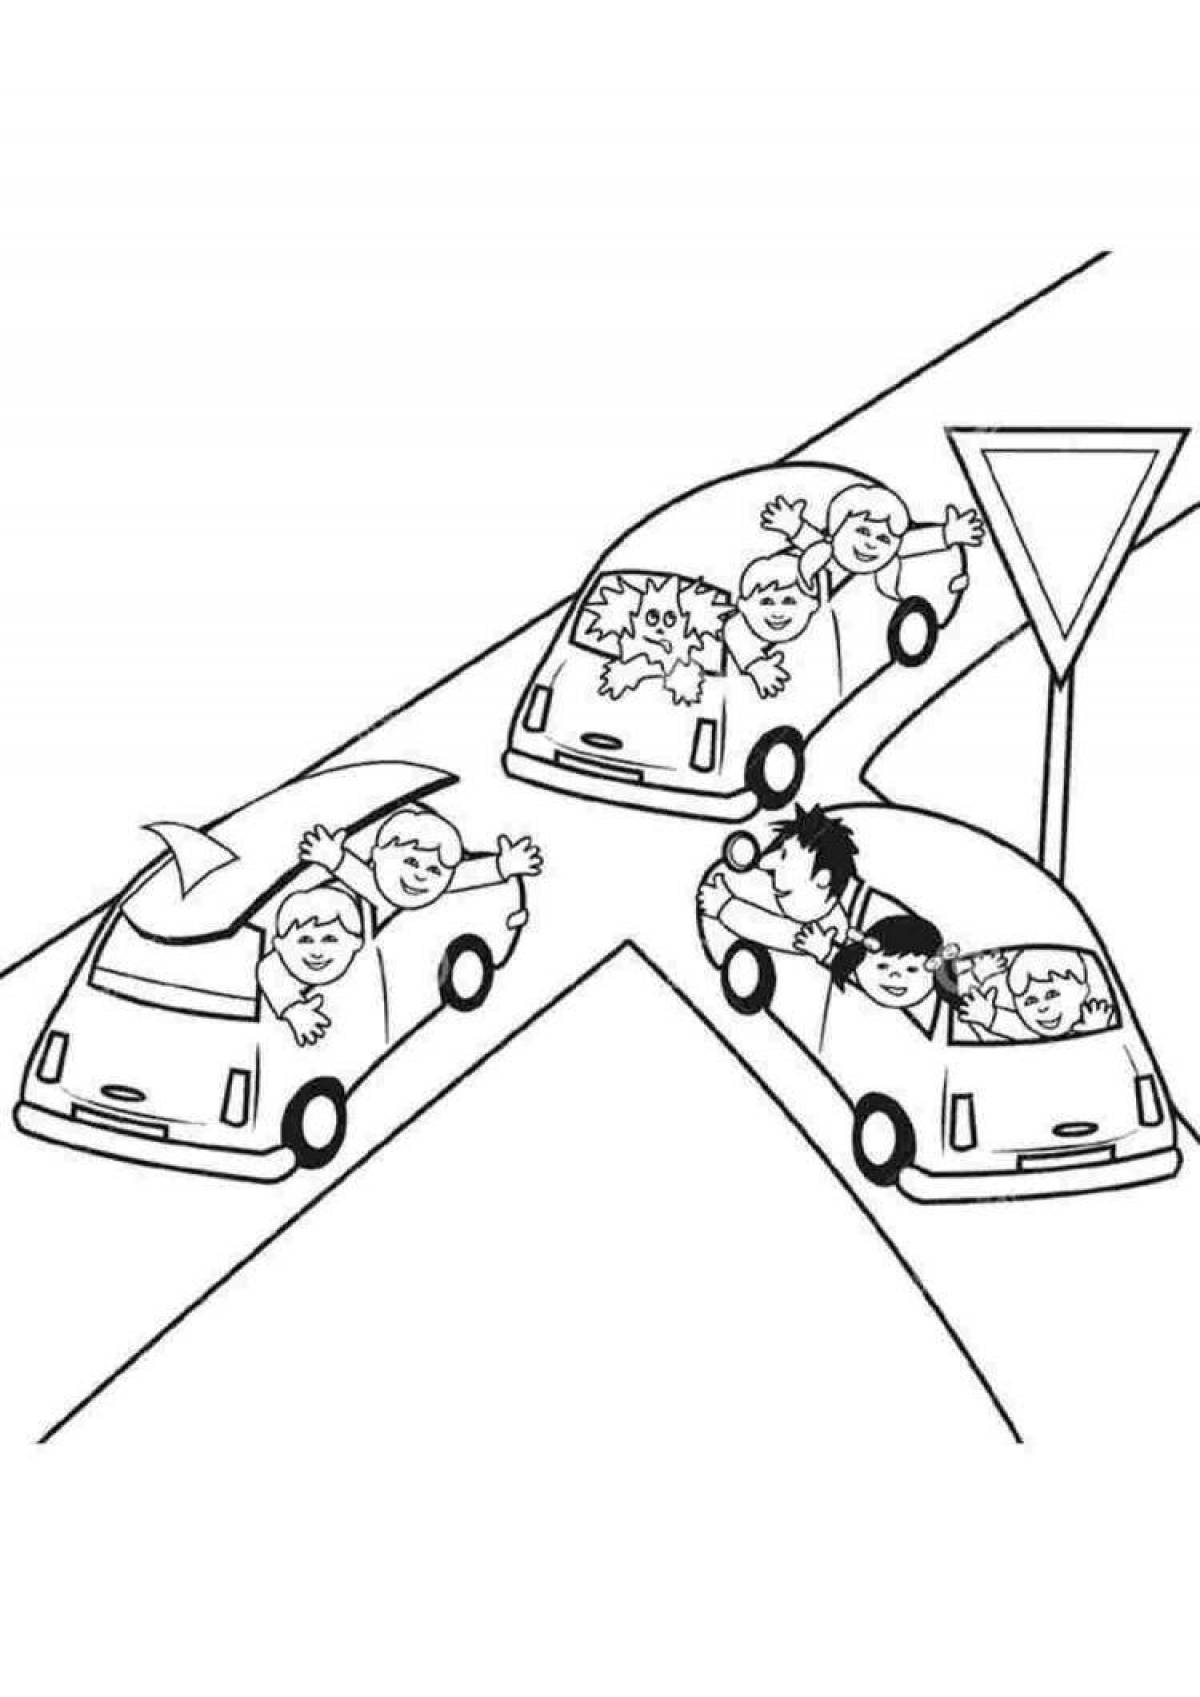 Coloring page amazing crossroads